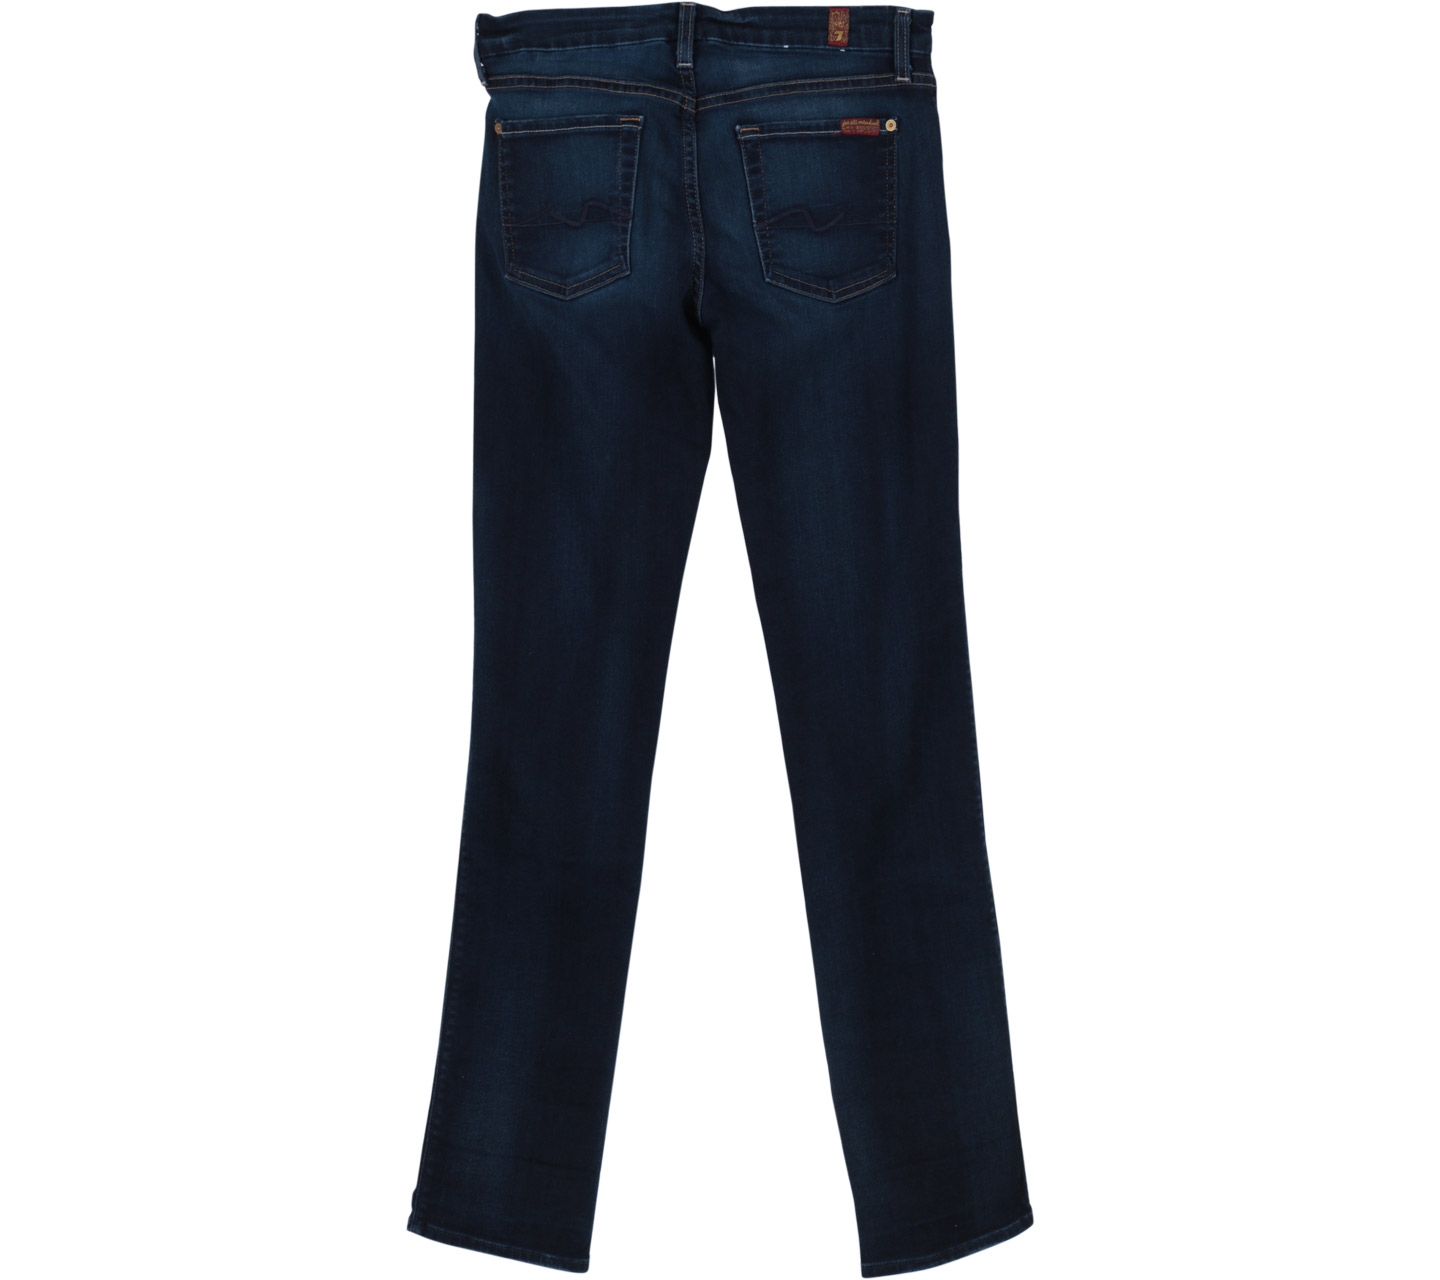 7 For All Mankind Blue Jeans Pants